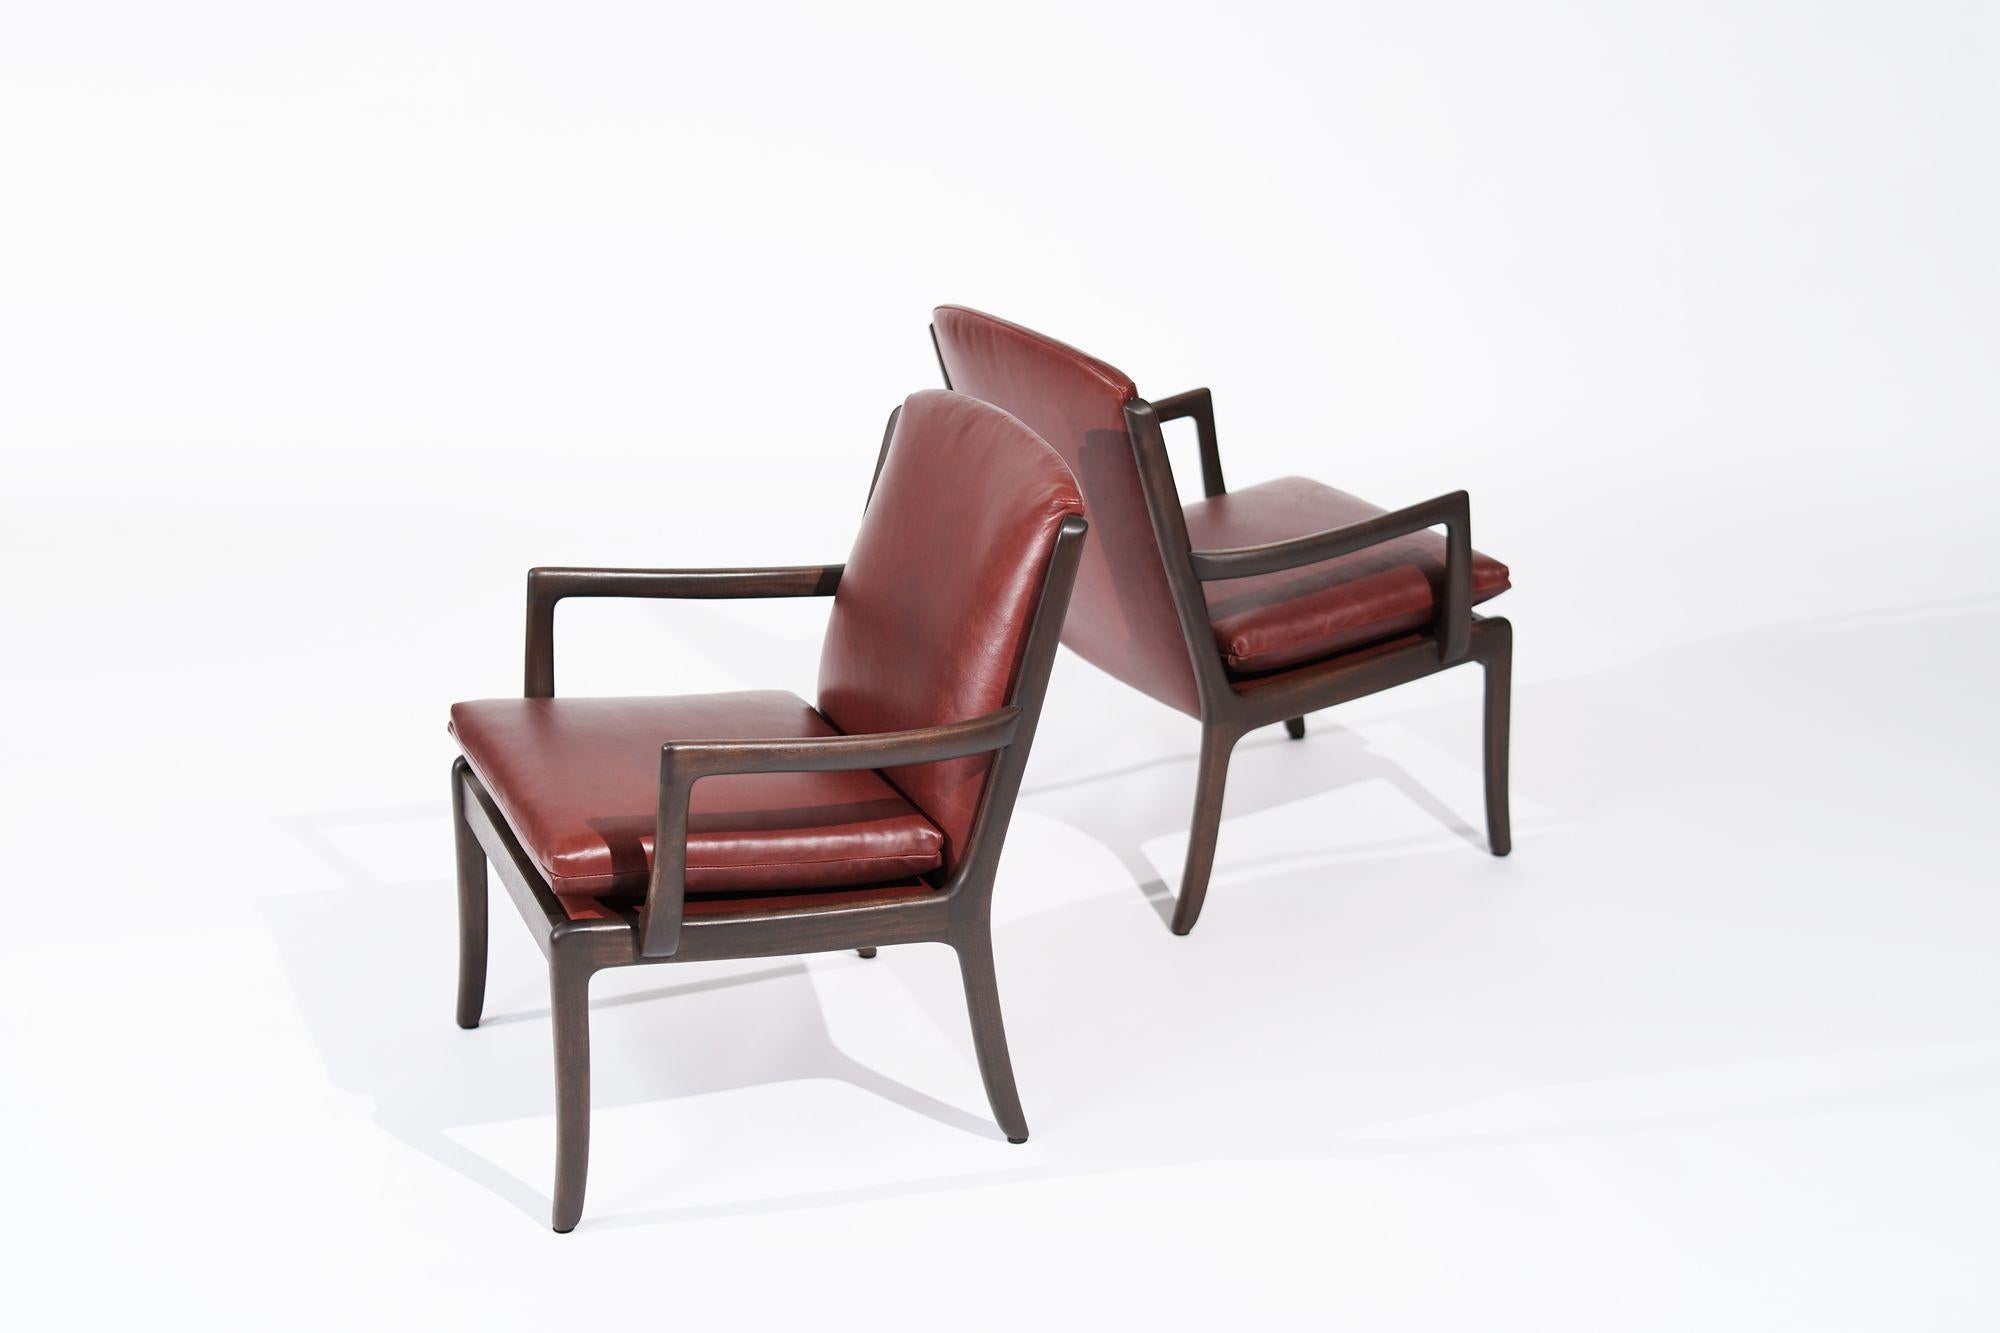 Danish Set of Lounge Chairs by Ole Wanscher in Sangria Leather, Denmark, C. 1960s For Sale